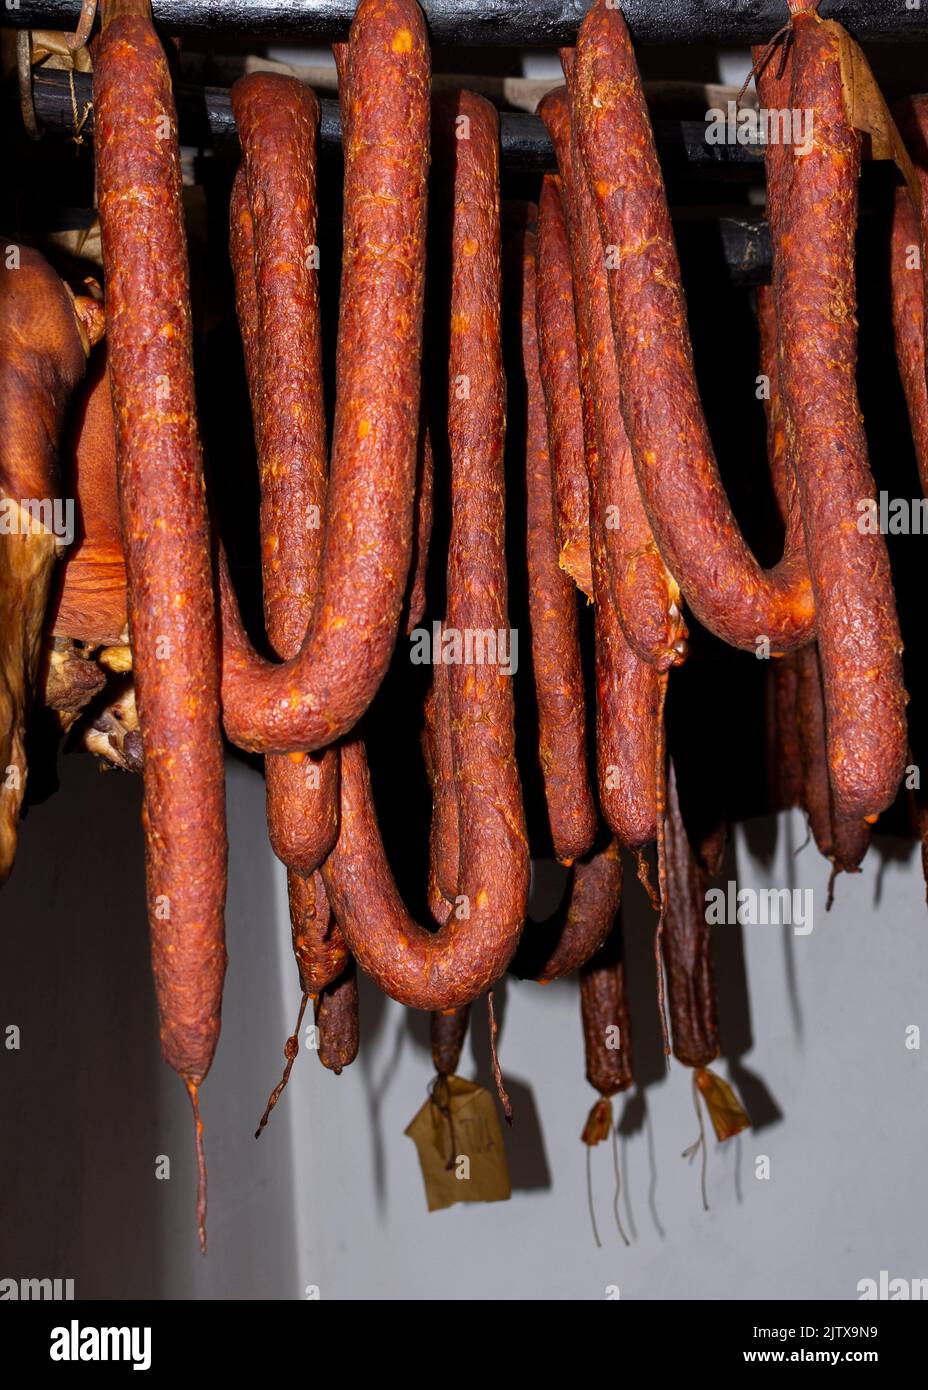 Smoked, dry, cured sausages hanging in the vintage smokehouse. Stock Photo